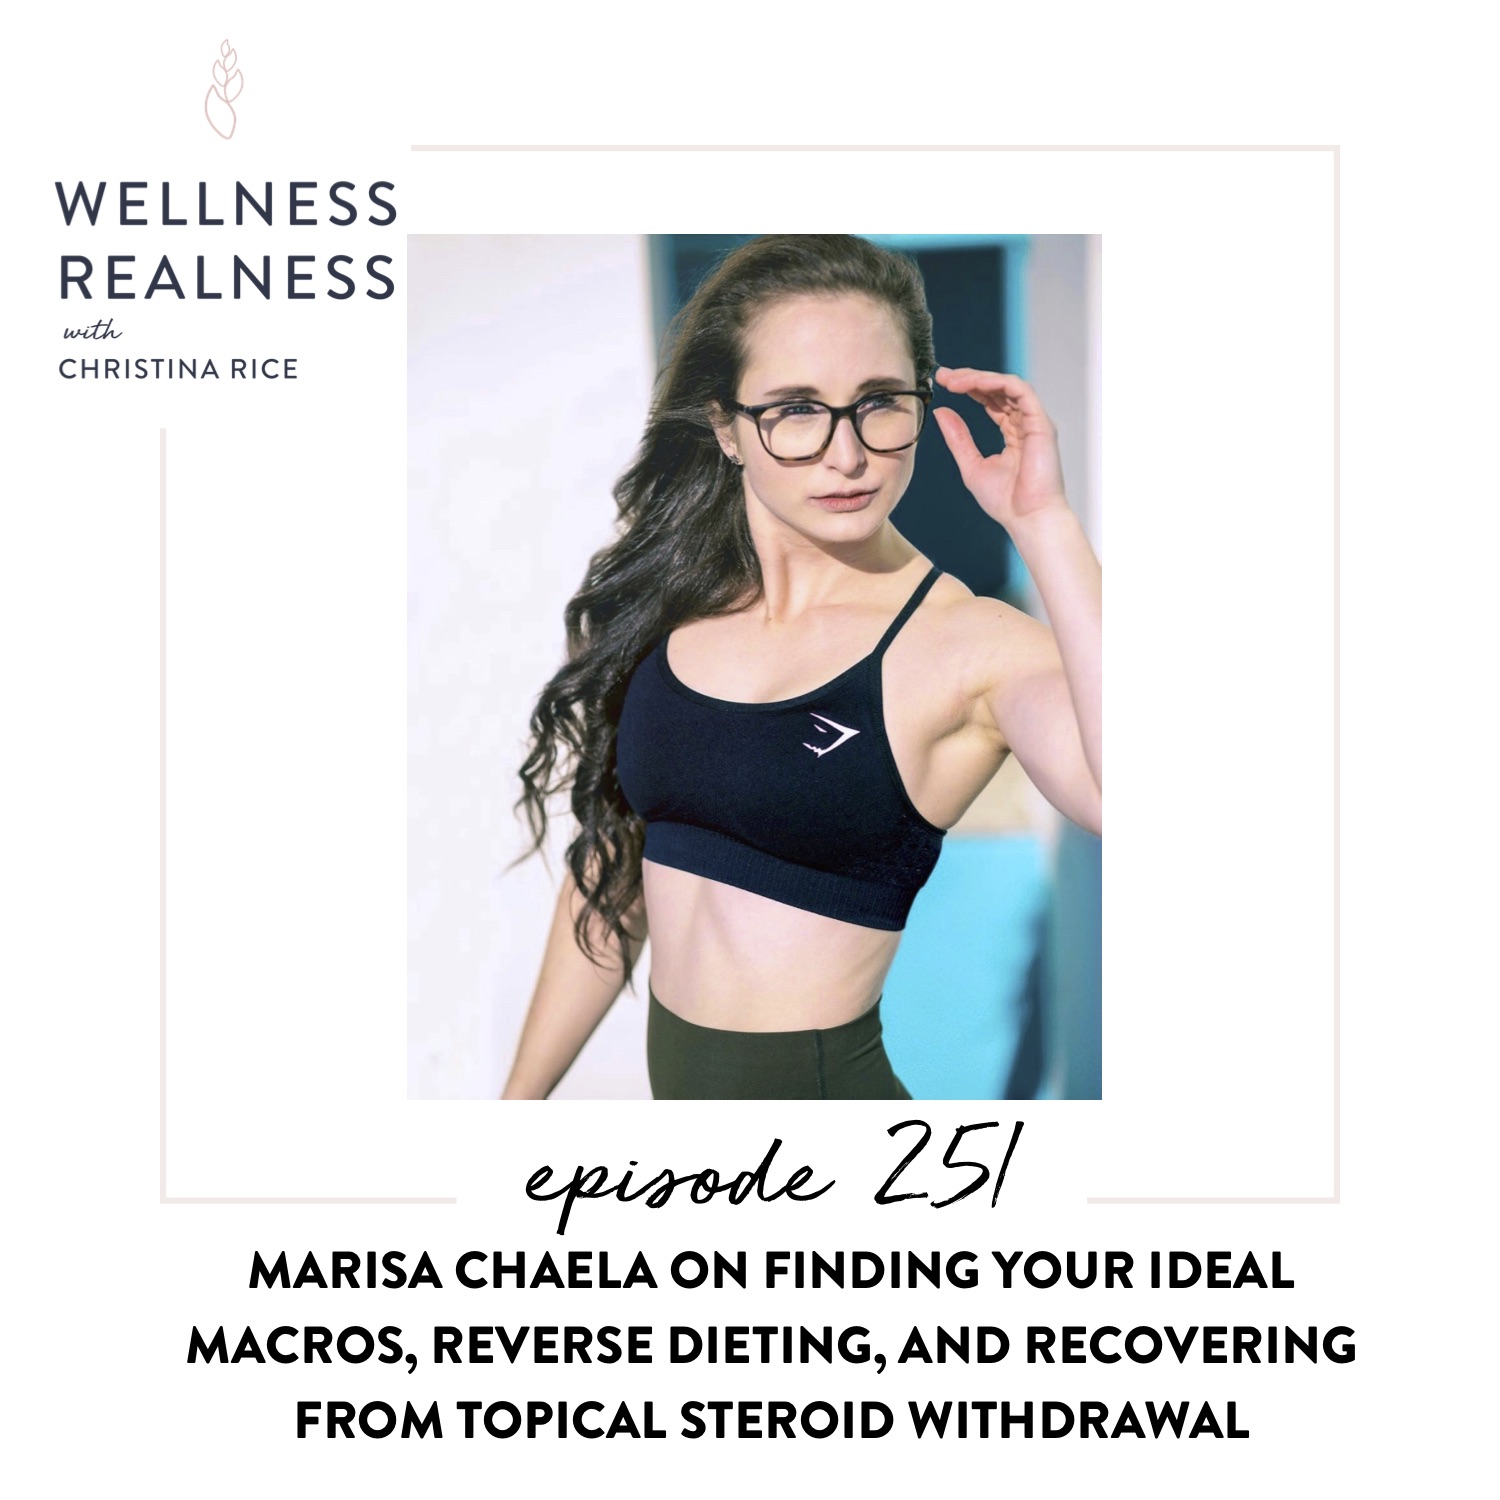 251: Marisa Chaela on Finding Your Ideal Macros, Reverse Dieting, and Recovering from Topical Steroid Withdrawal